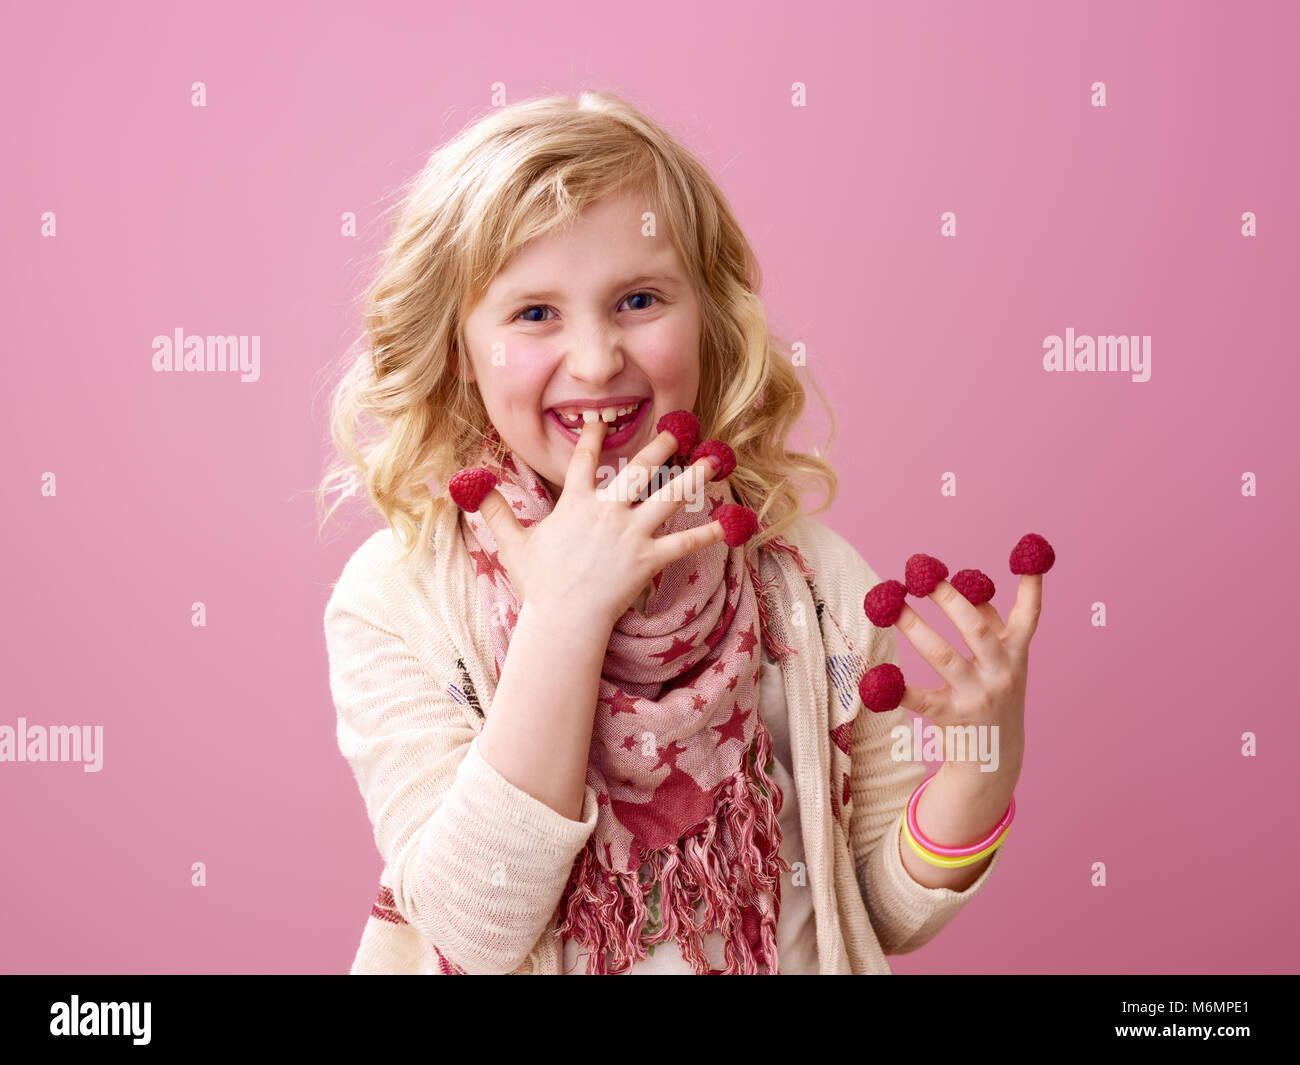 6. Wavy Blonde Hair Girl Pictures, Images and Stock Photos - iStock - wide 2